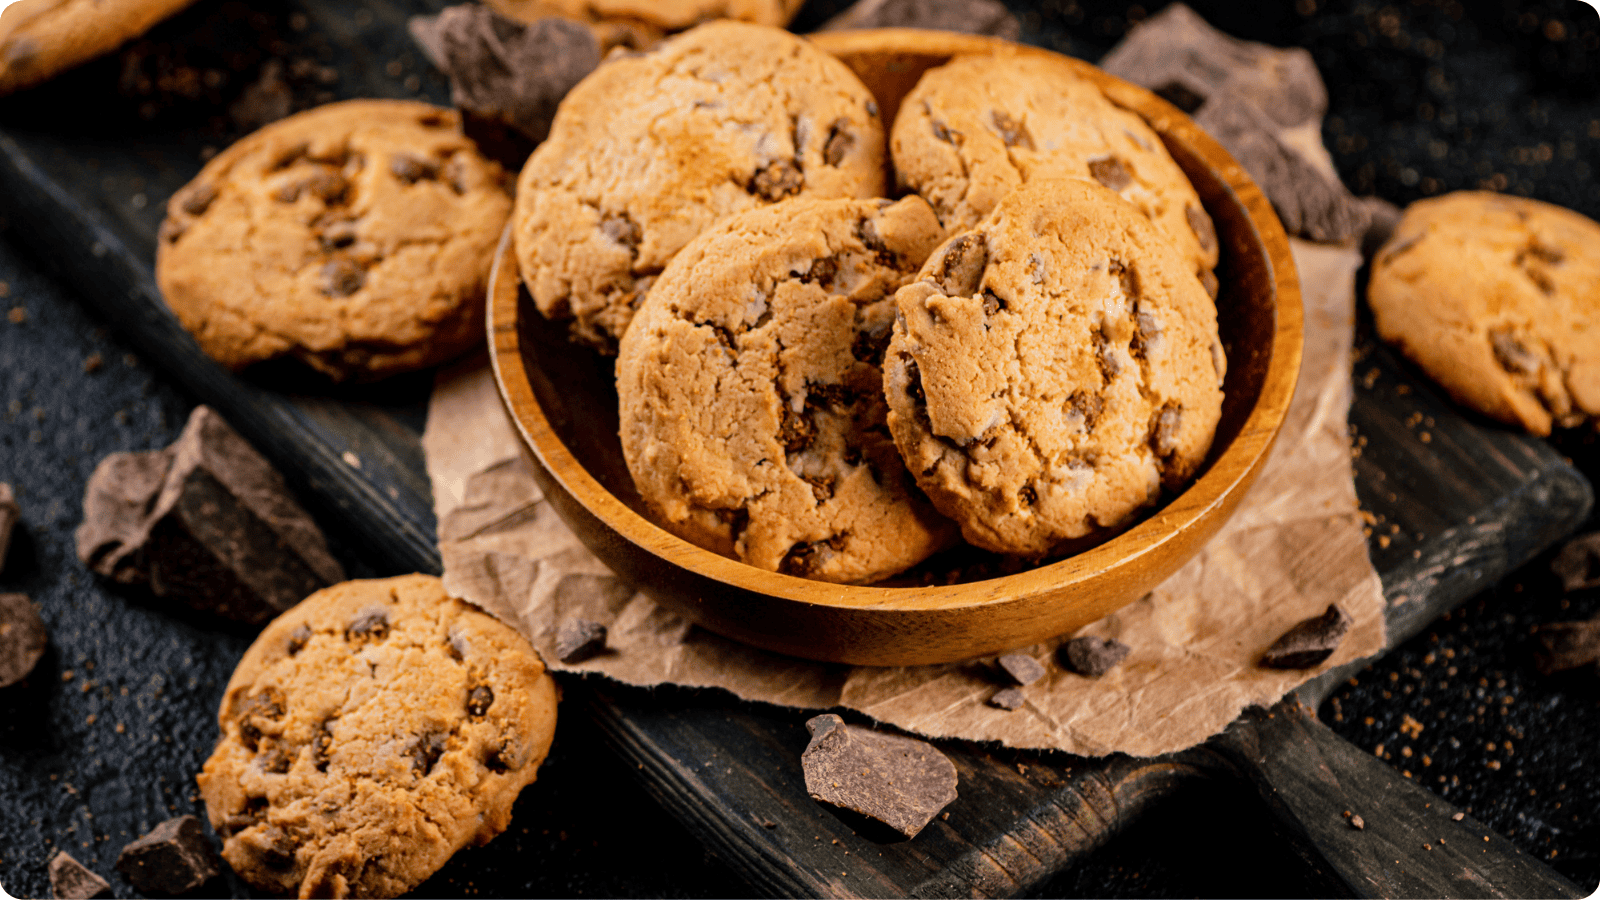 Chocolate chip cookies are arranged in a wooden bowl atop a cutting board, with scattered cookies and chocolate chips displayed on a black countertop.⁣